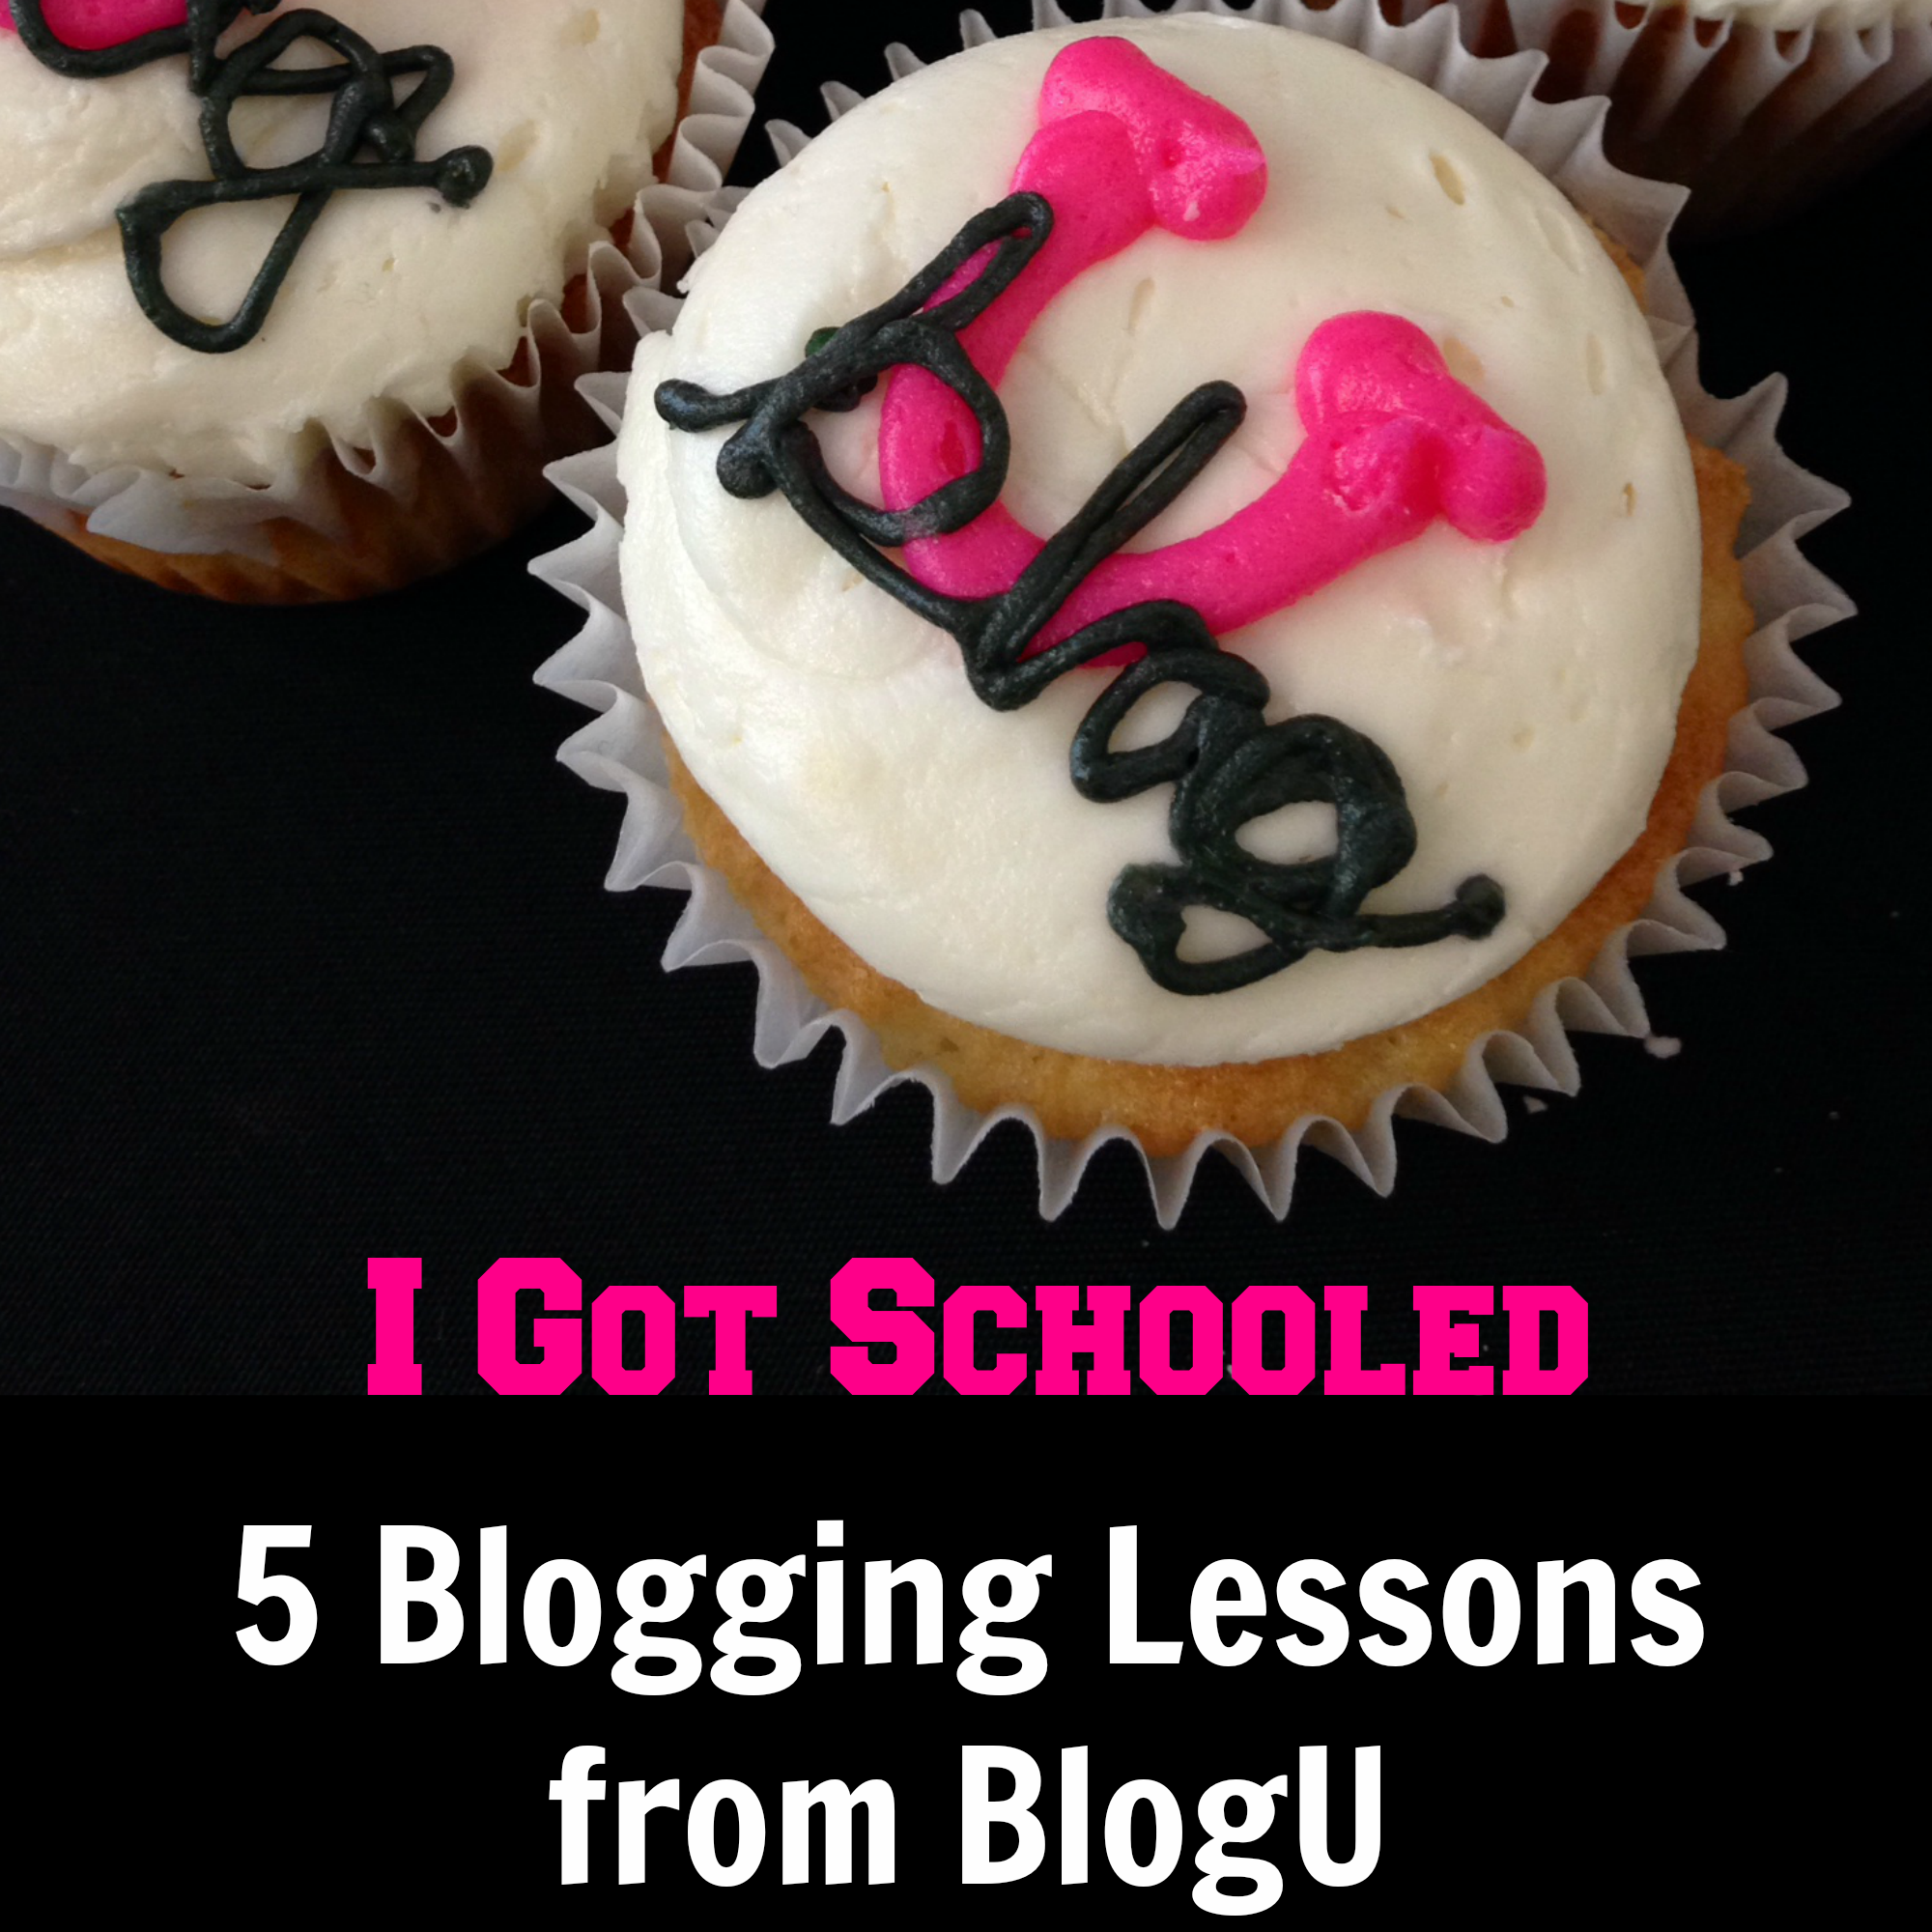 5 Blogging Lessons from BlogU